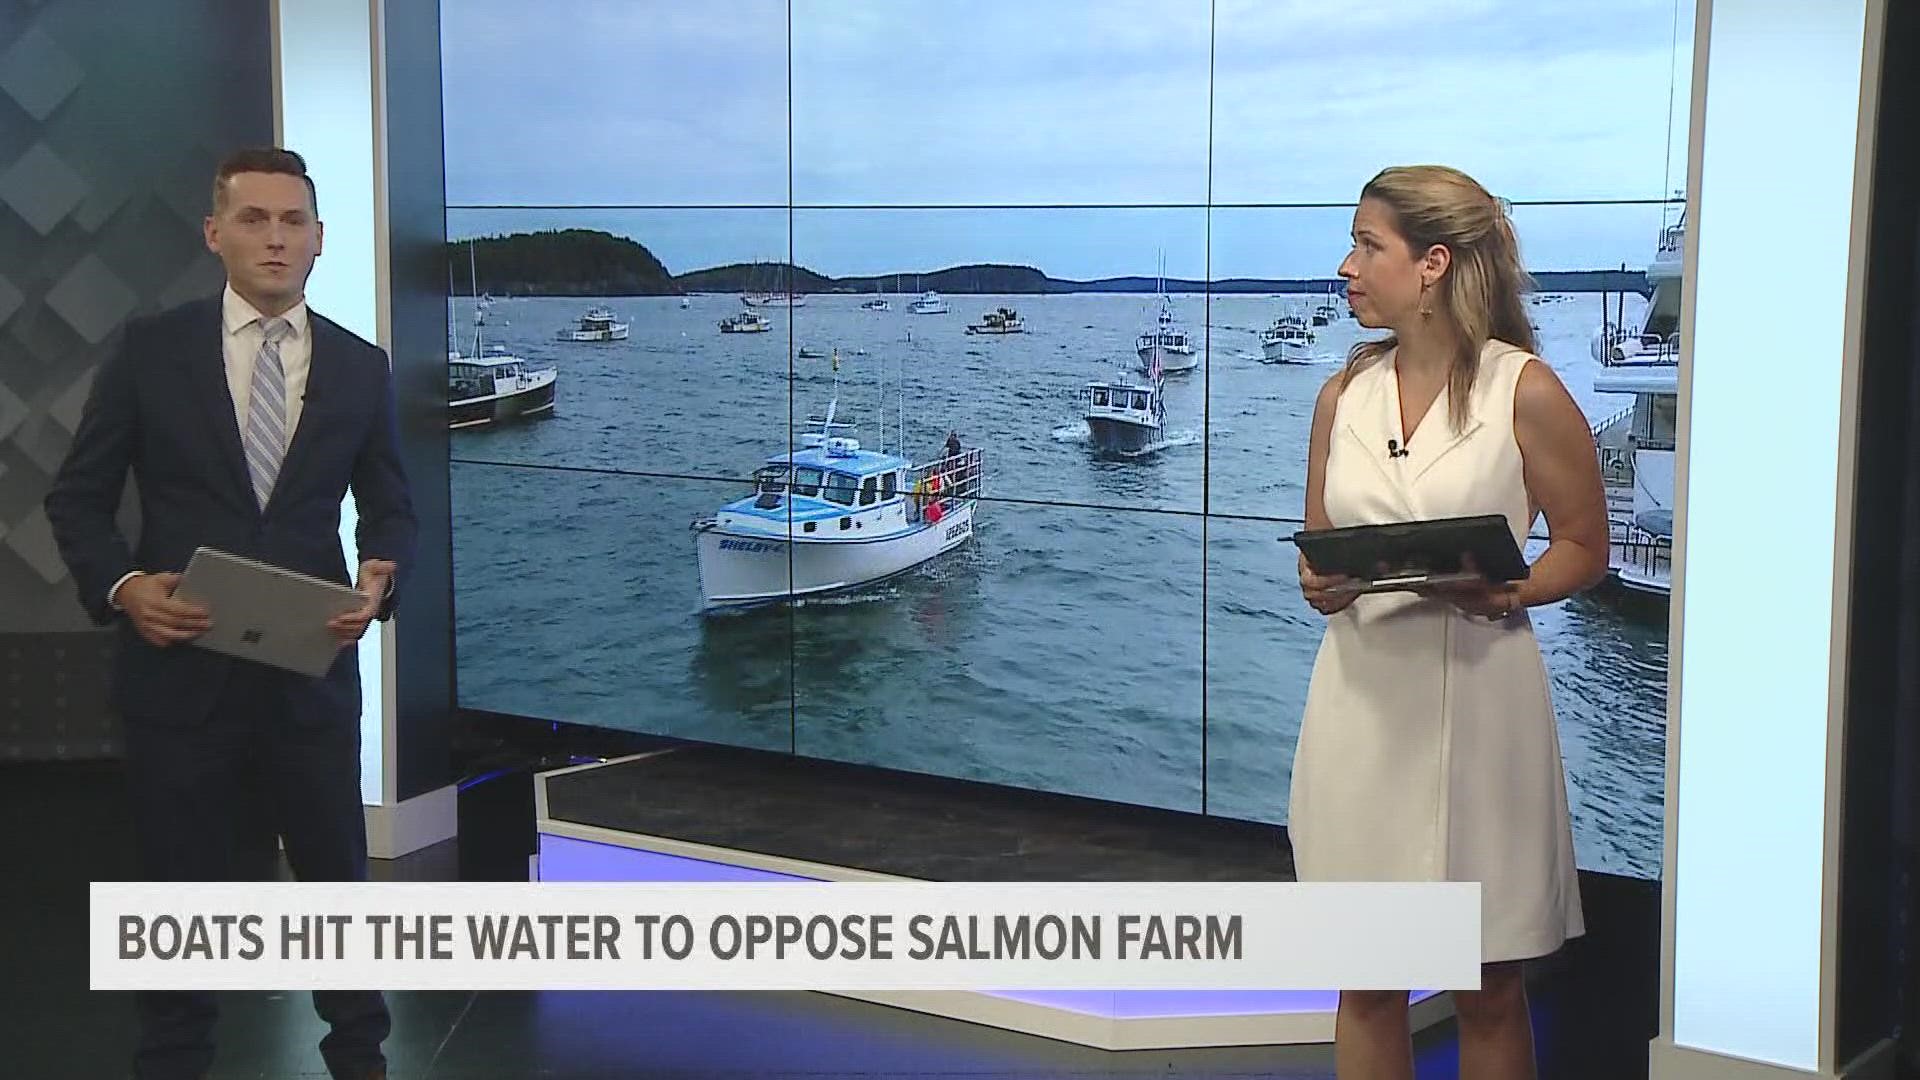 Over 100 boats and other people on land protested against a proposed salmon farm near Maine’s Acadia National Park.